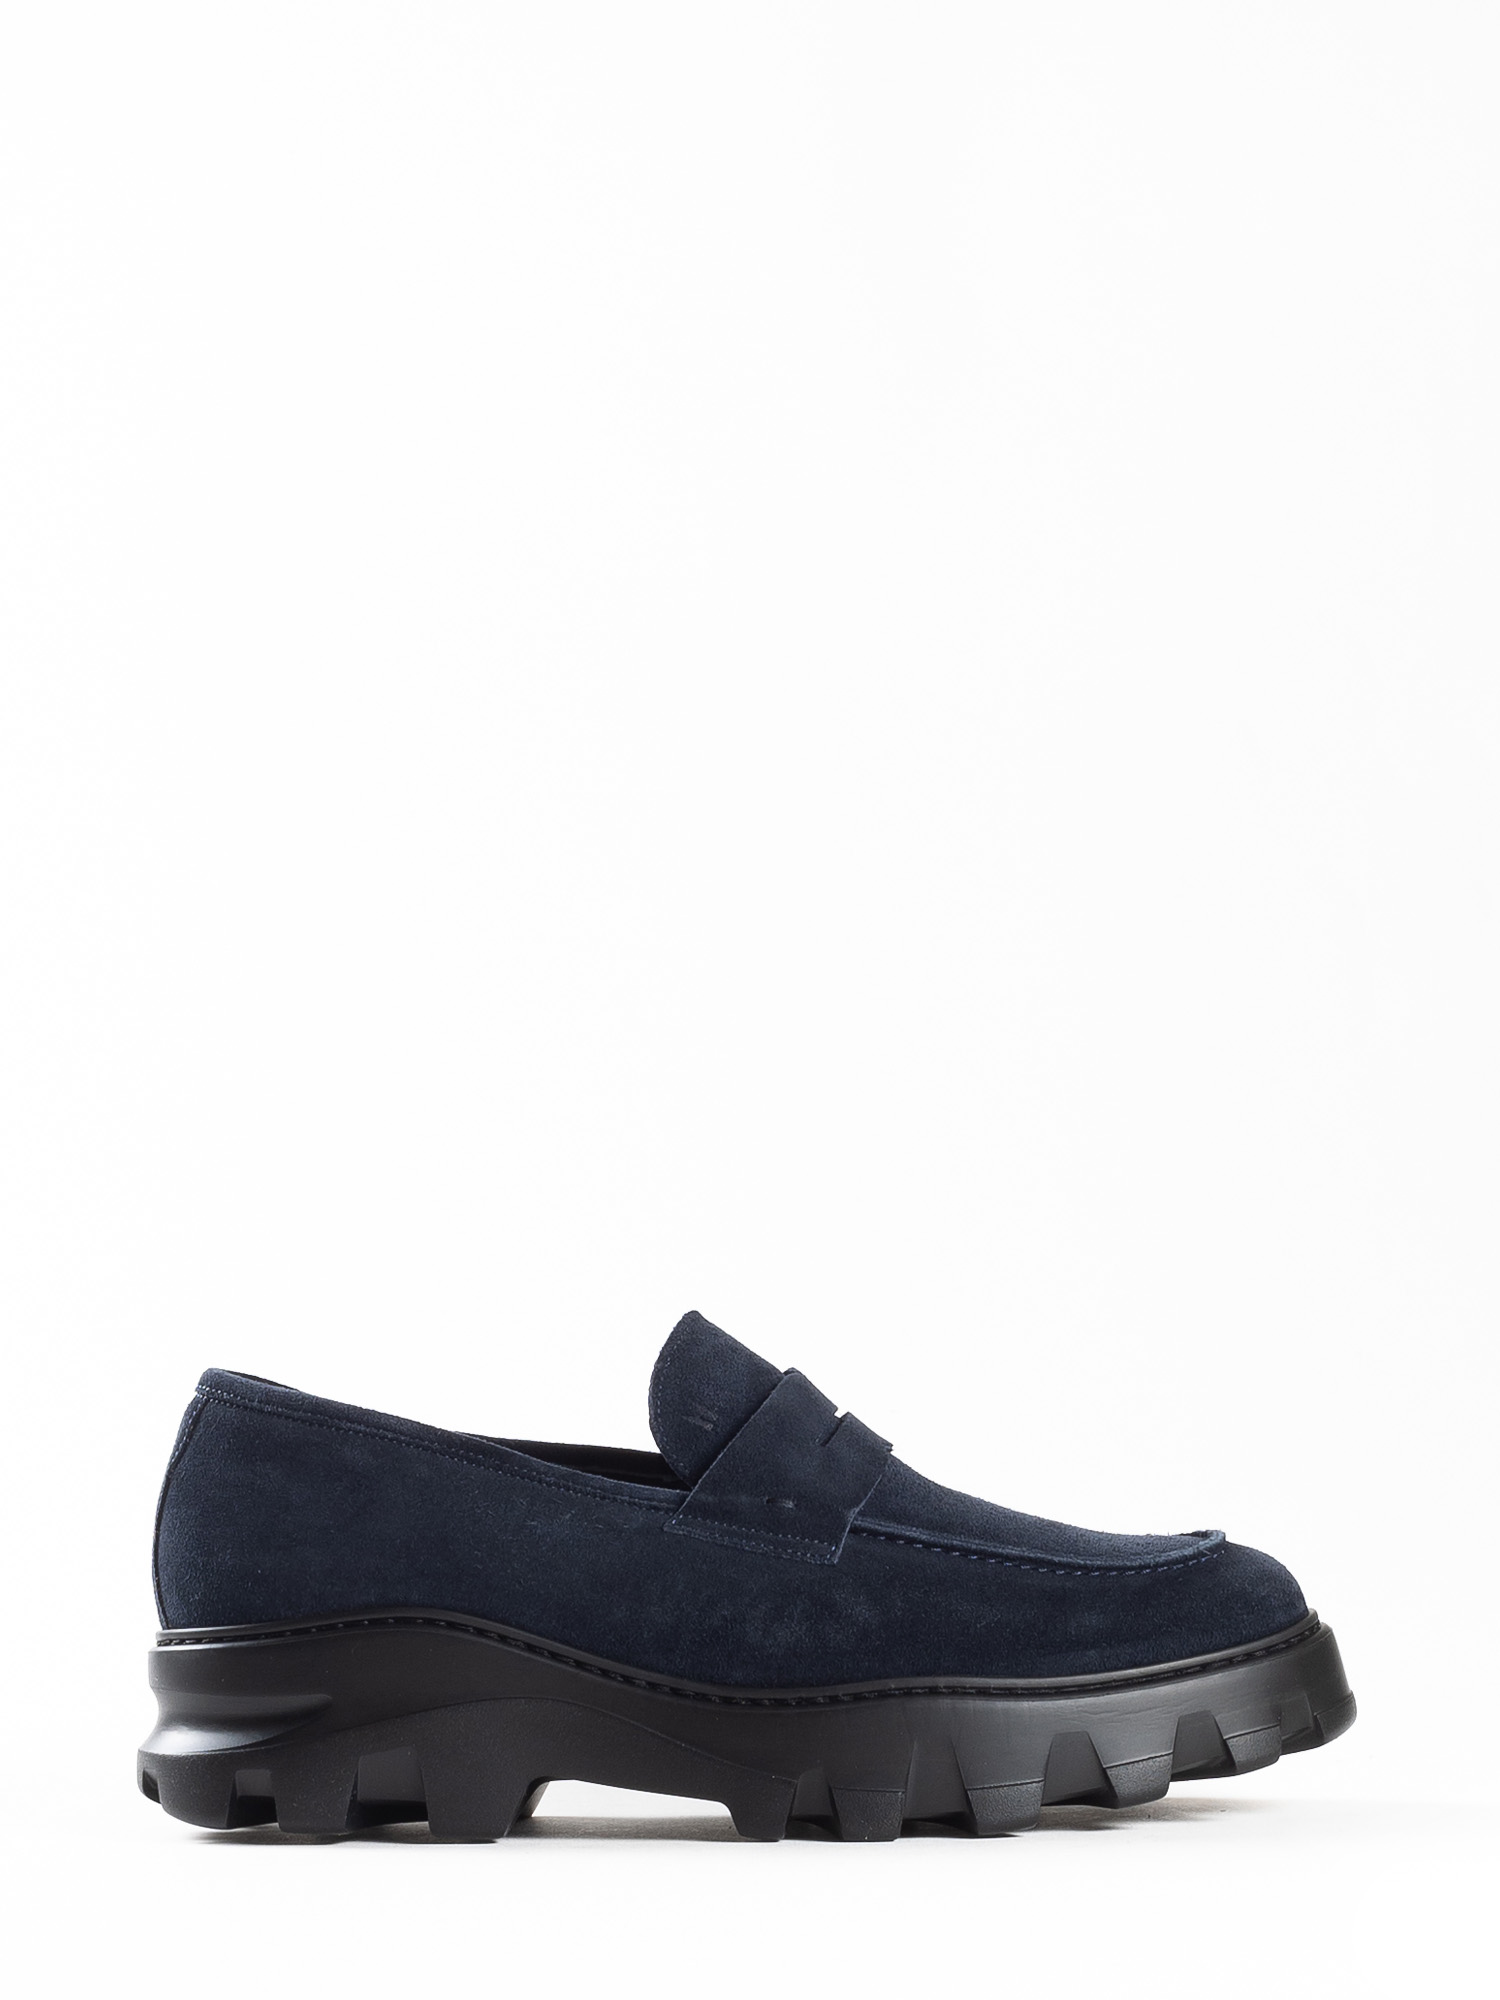 SUEDE LOAFERS WITH FUR - MORESCHI